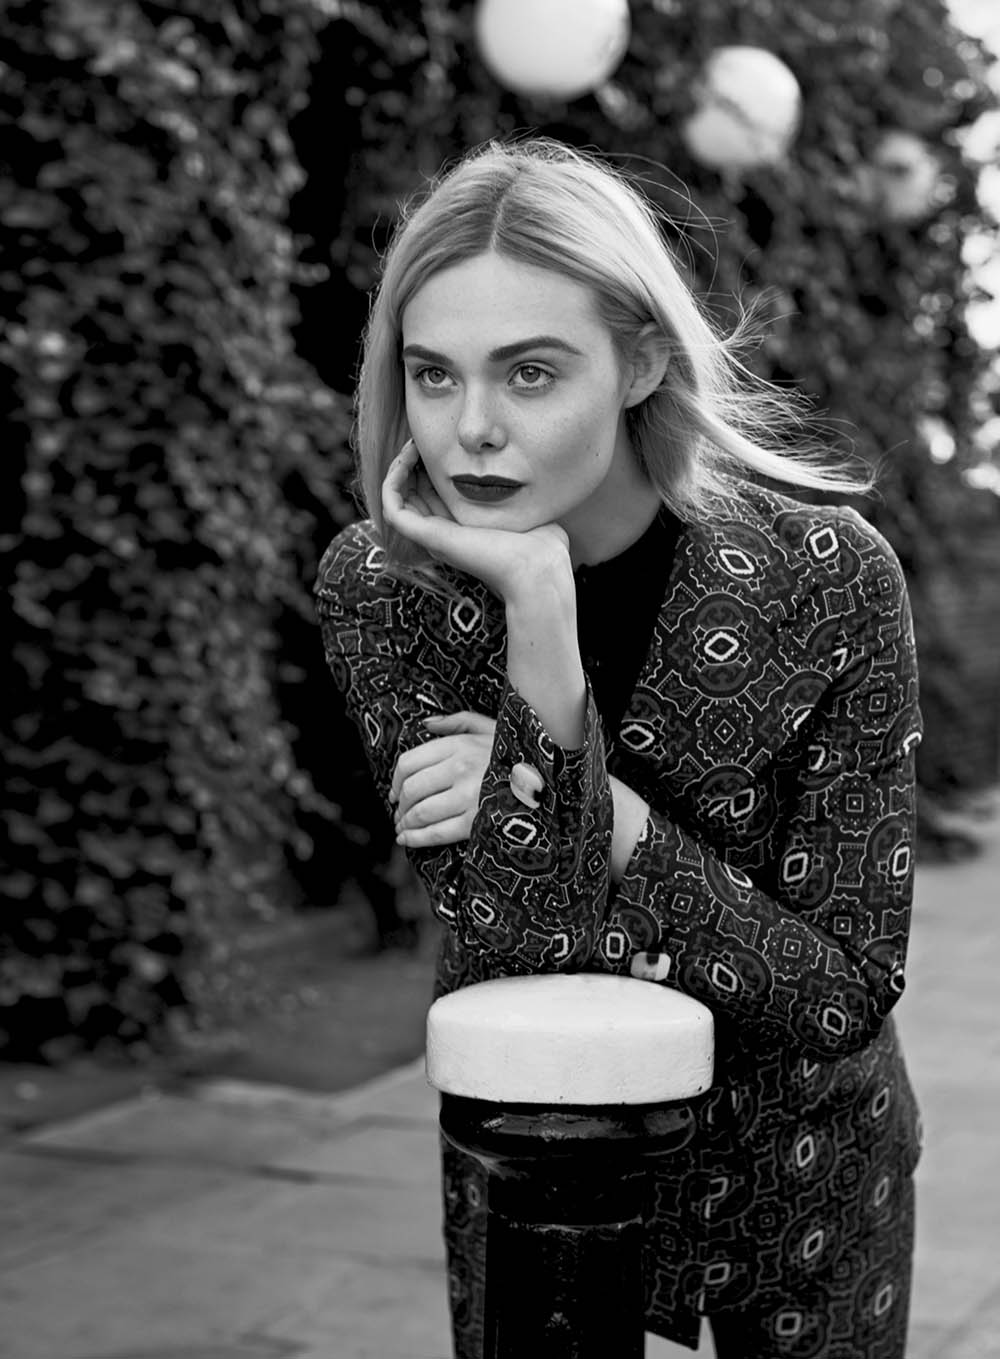 Elle Fanning covers Marie Claire US February 2020 by Thomas Whiteside